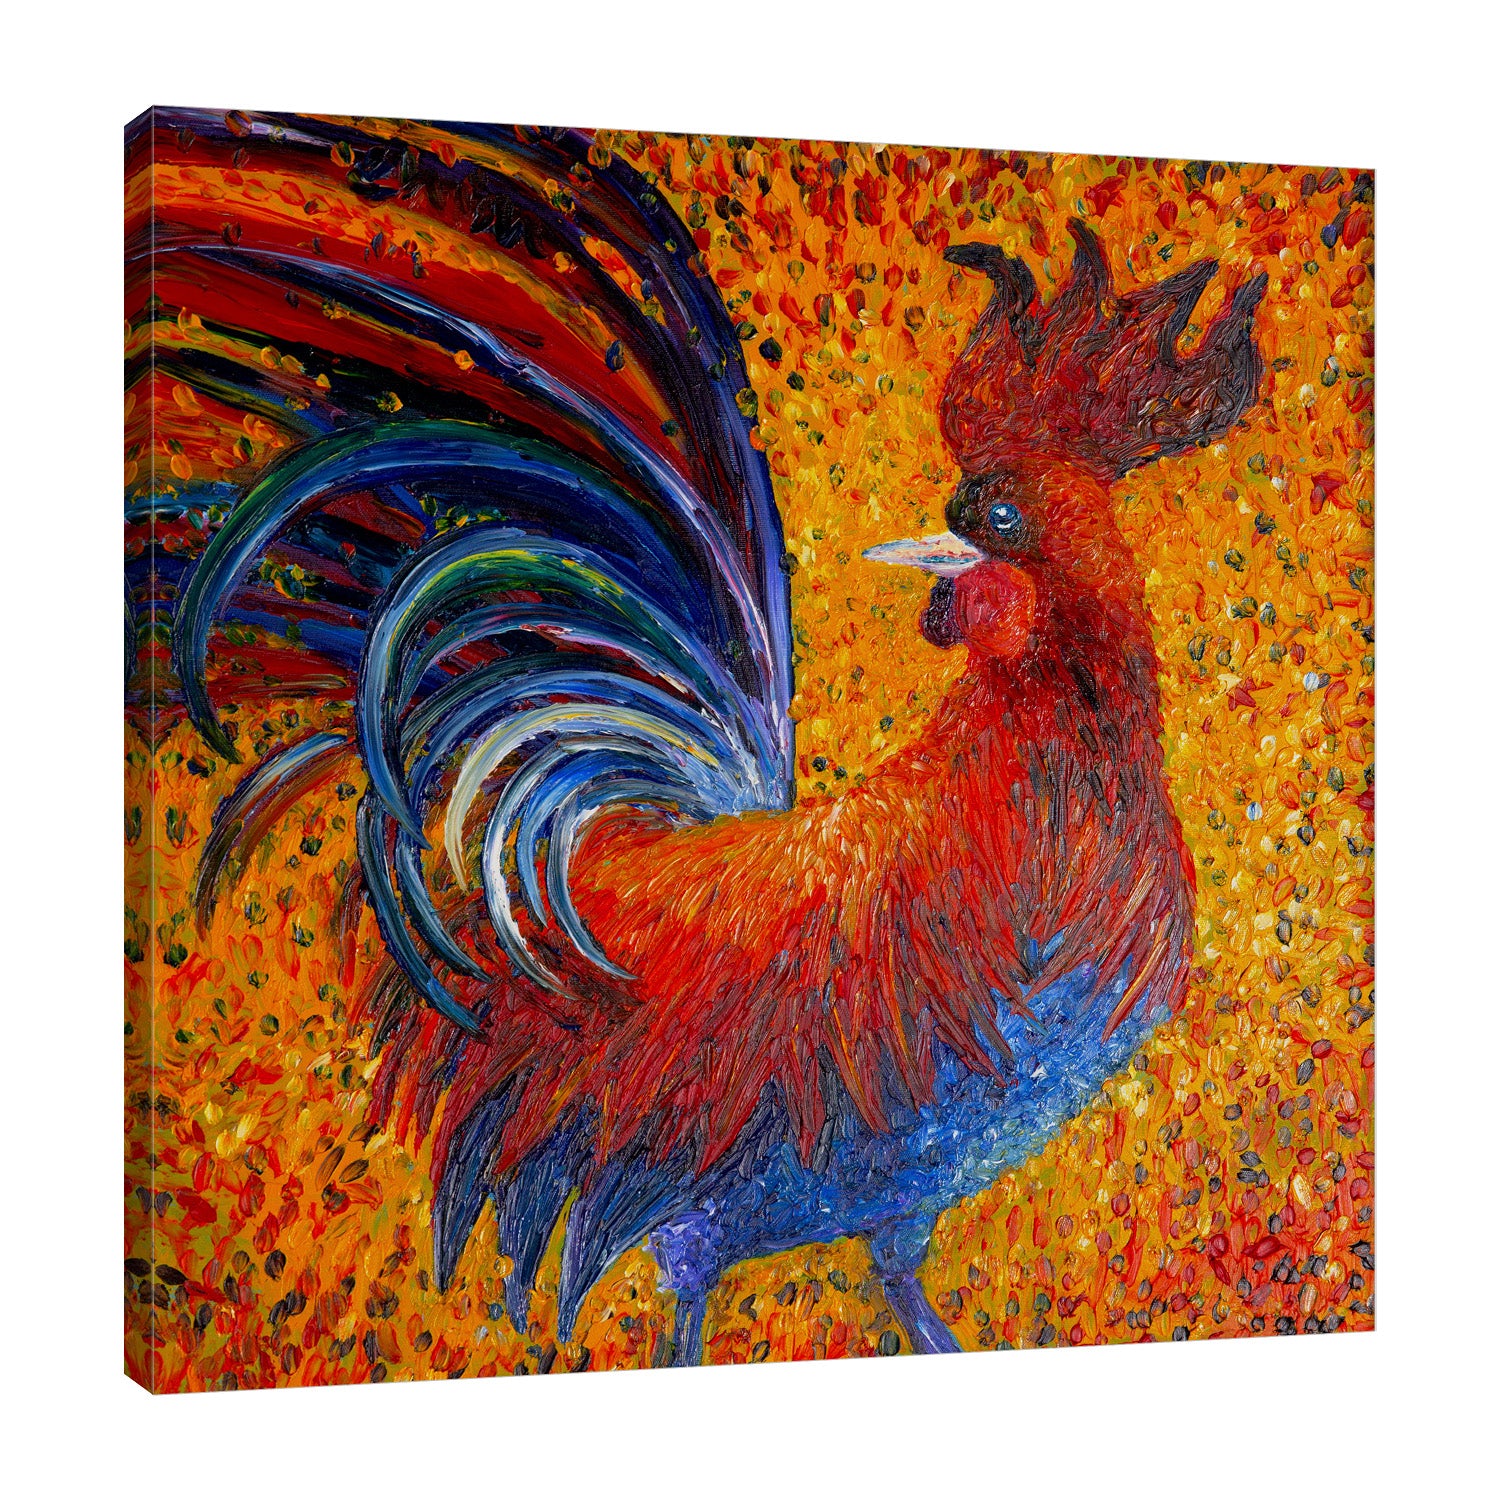 Chiara-Magni,Modern & Contemporary,Animals,Finger-paint,chicken,chickens,hens,animals,animal,farm animal,rooster,roosters,red,orange,yellow,feather,